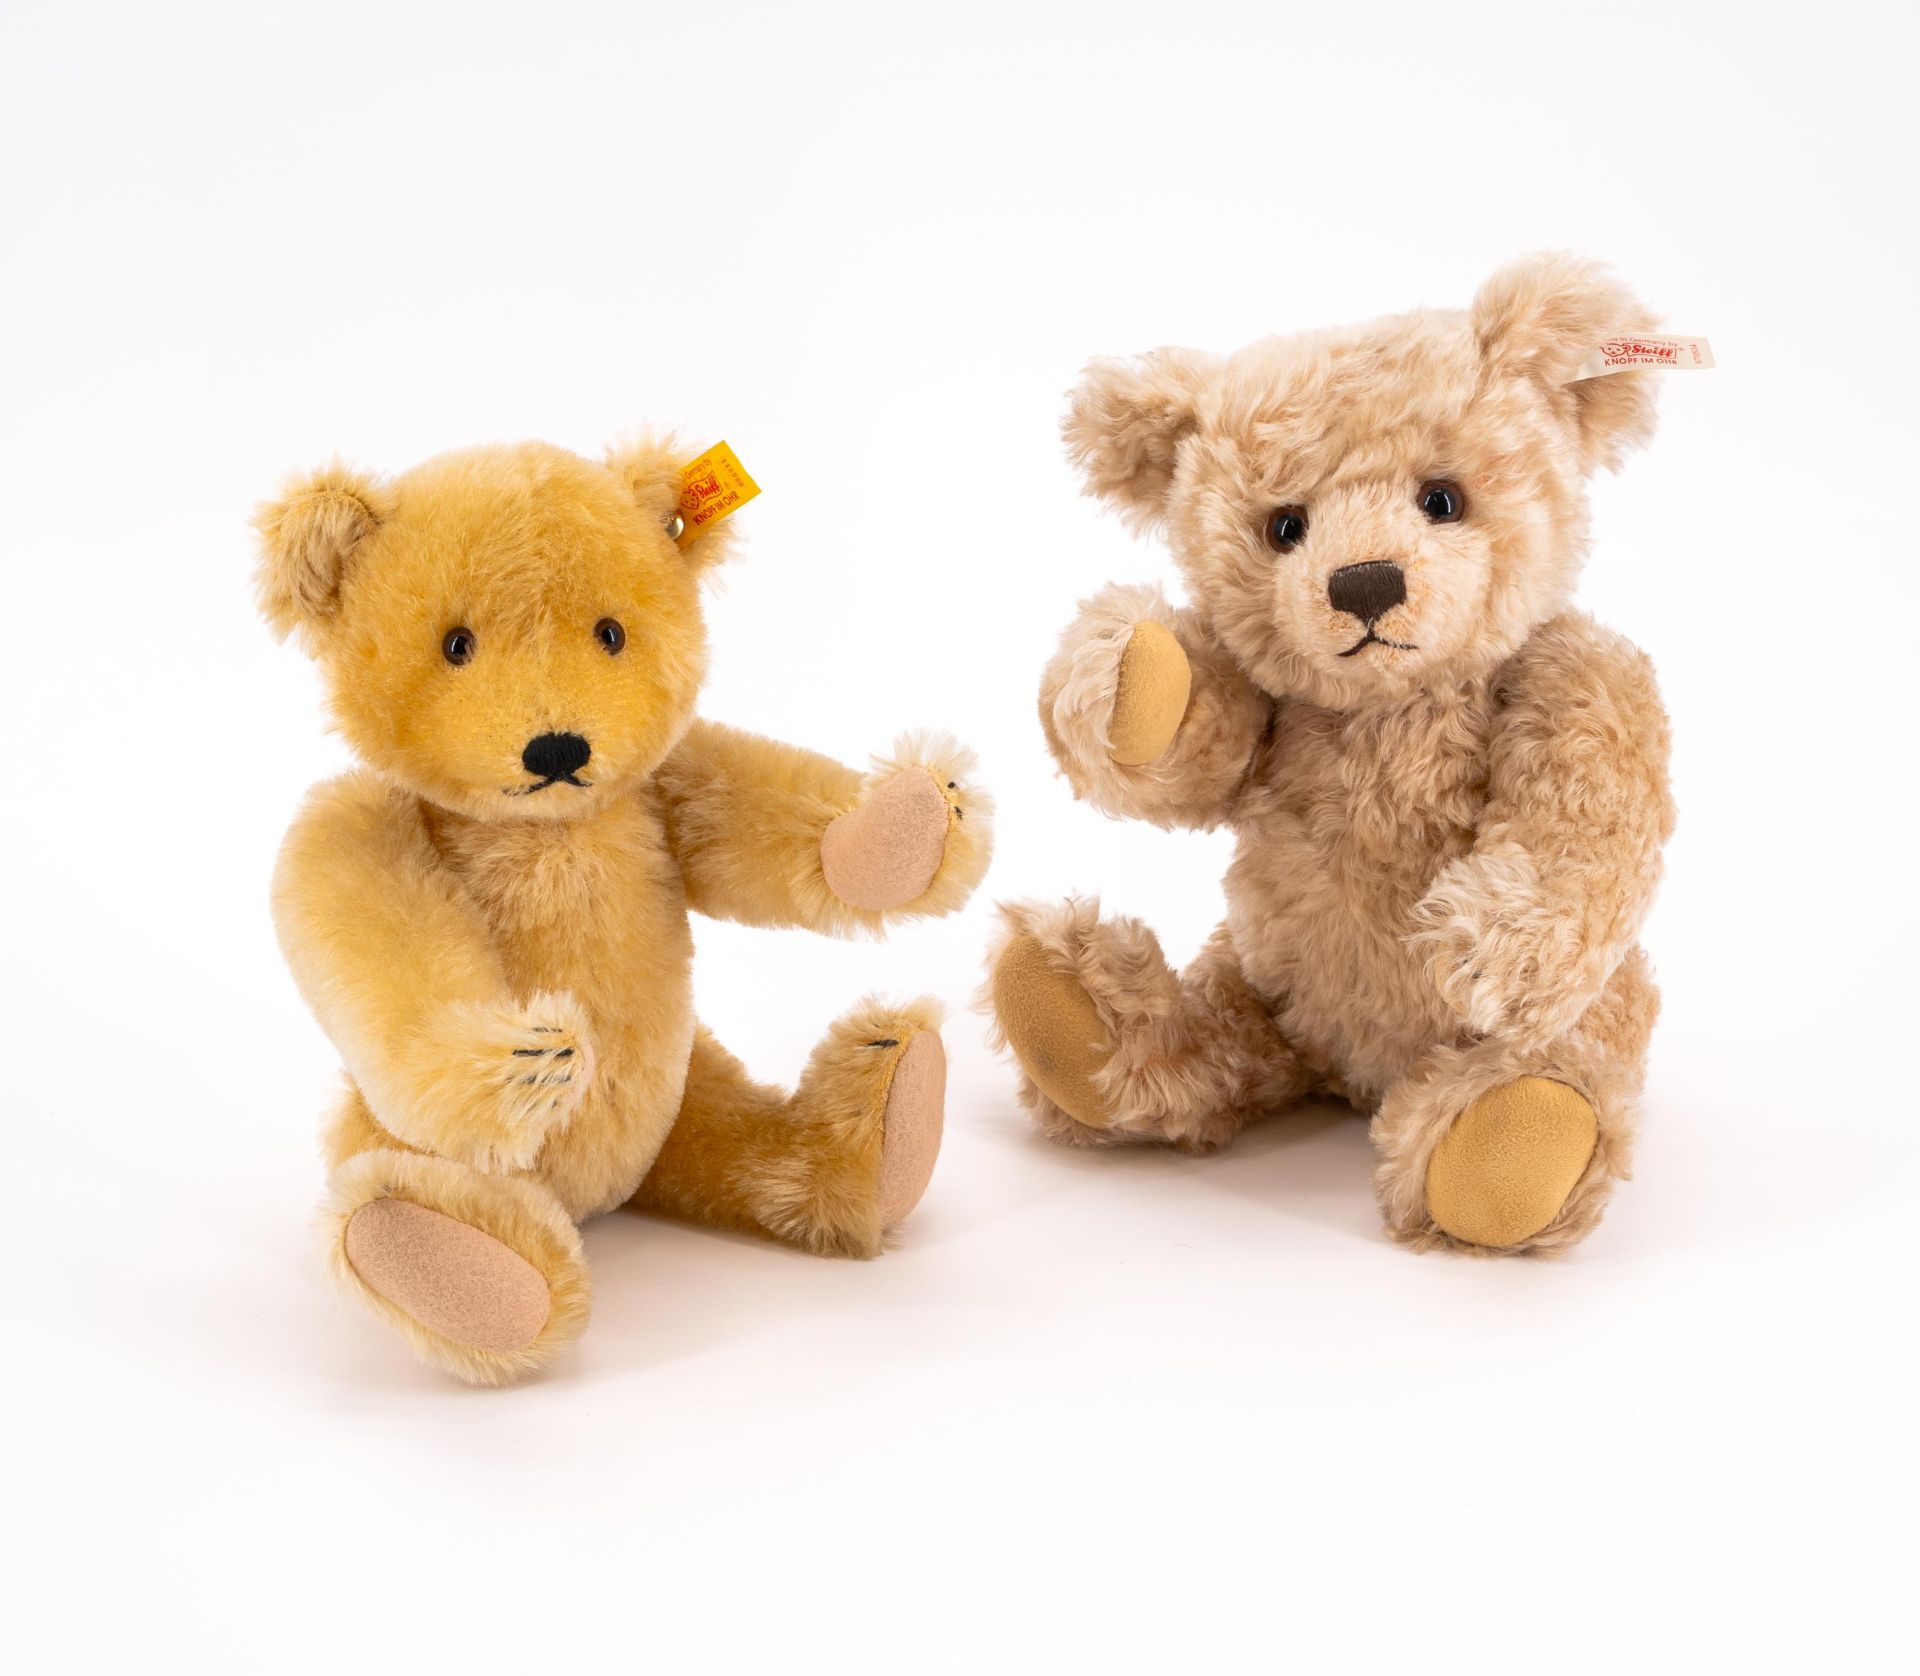 Steiff: TWO STEIFF BEARS FROM COLLECTORS EDITIONS MADE OF MOHAIR PLUSH, WOOL AND GLASS